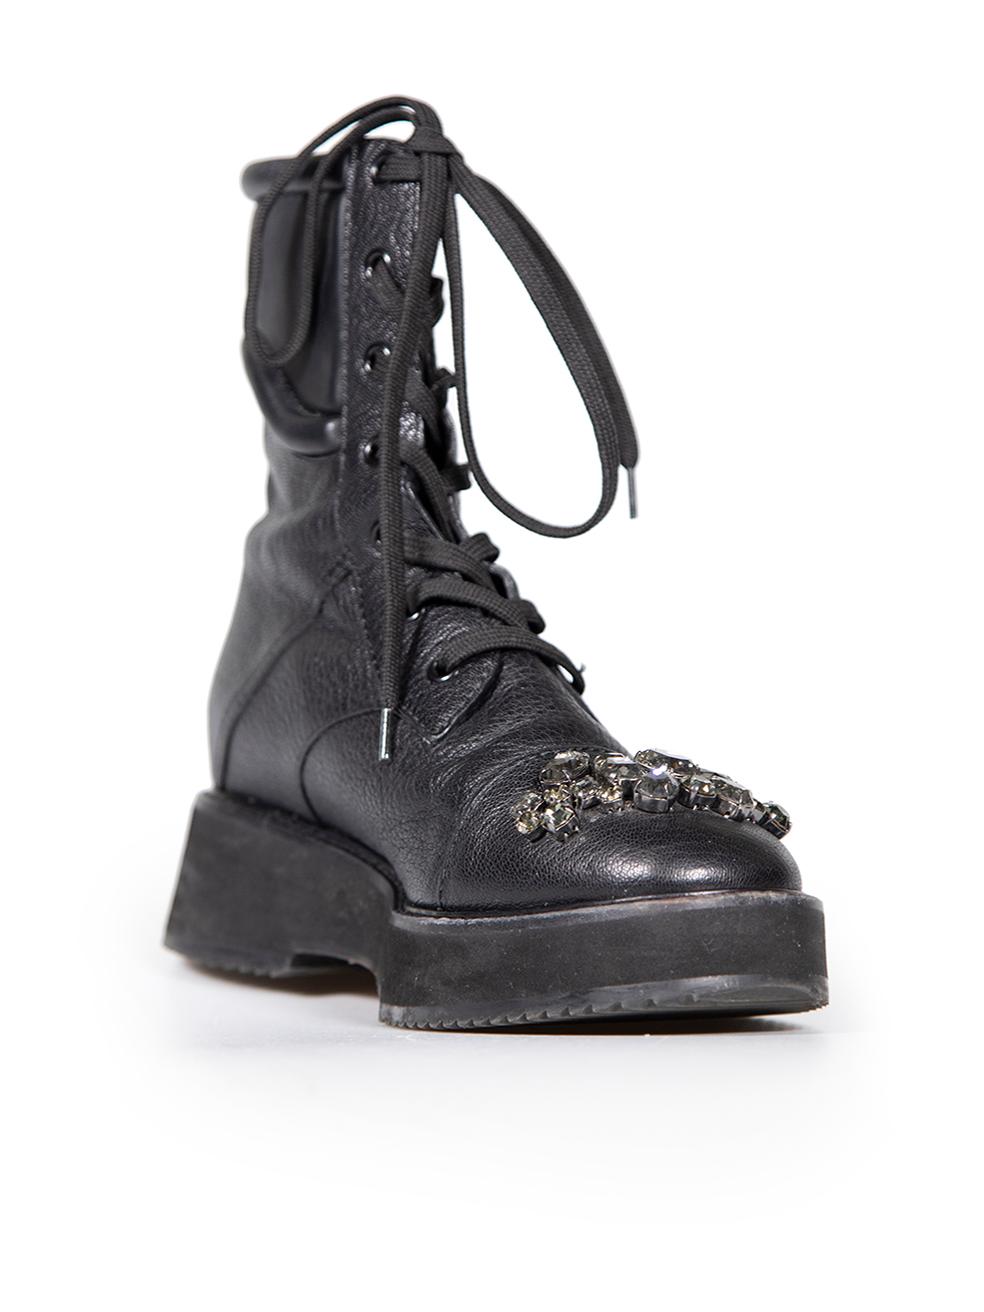 CONDITION is Very good. Minimal wear to boots is evident. Minimal peeling to finishing and small scratch on inner side of right shoe this used Jimmy Choo designer resale item.
 
 
 
 Details
 
 
 Black
 
 Leather
 
 Biker boots
 
 Flatform
 
 Round